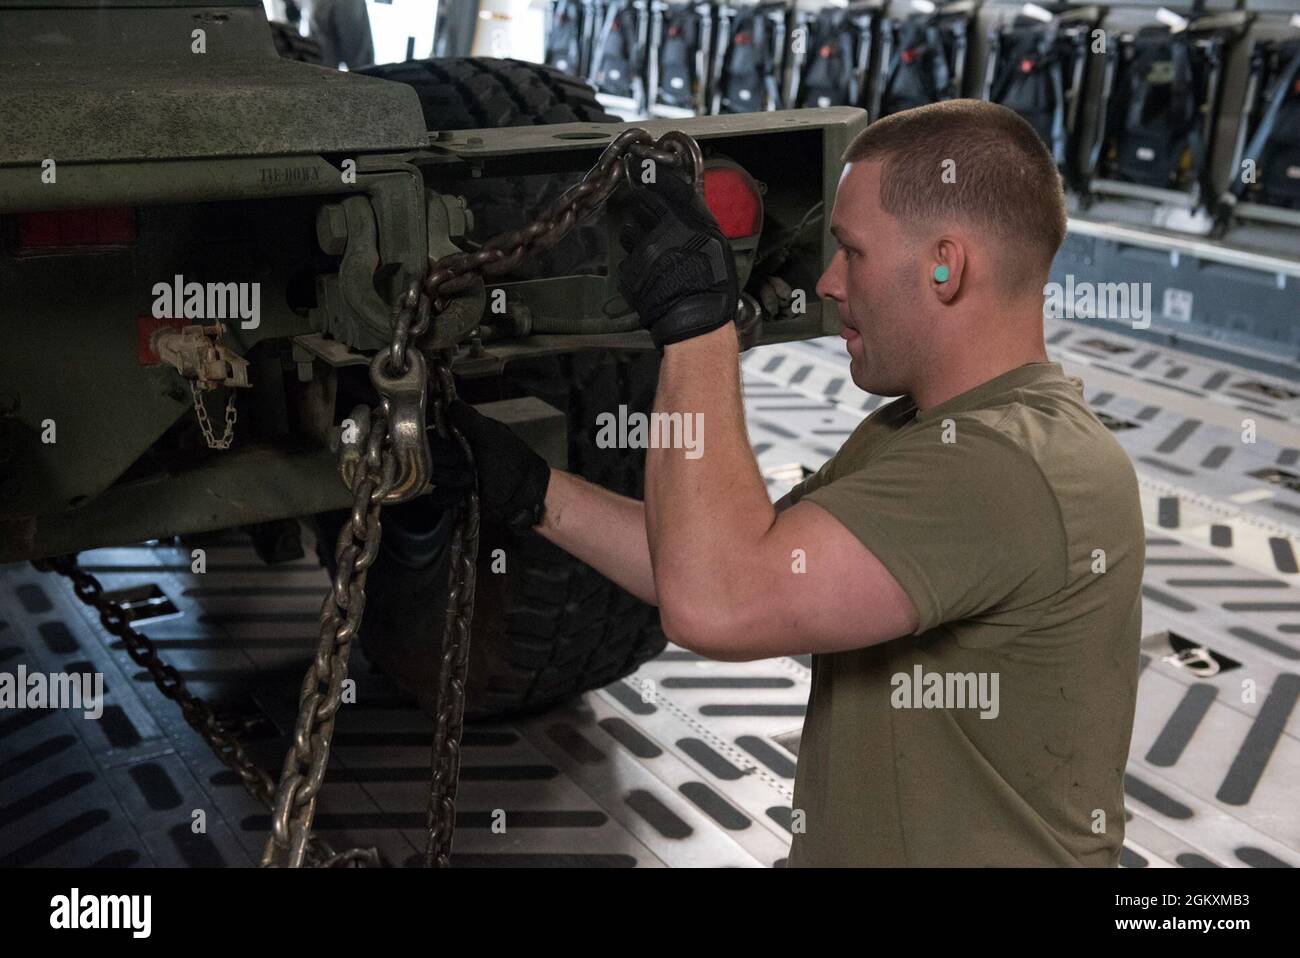 U.S. Air Force Staff Sgt. Jonah Everage, an air transportation specialist with the 123rd Airlift Wing, Kentucky National Guard, secures a U.S. Army High Mobility Artillery Rocket System (HIMARS) vehicle with B Battery, 1st Battalion, 623rd Field Artillery Regiment, Kentucky National Guard, onto a C-17 Globemaster III aircraft with the 167th Airlift Wing, West Virginia National Guard at Bowman Field, Louisville, Kentucky, July 20, 2021, as part of Sentry Storm 2021. Sentry Storm, a joint training exercise hosted by the West Virginia Air National Guard, focuses on Agile Combat Employment (ACE) c Stock Photo